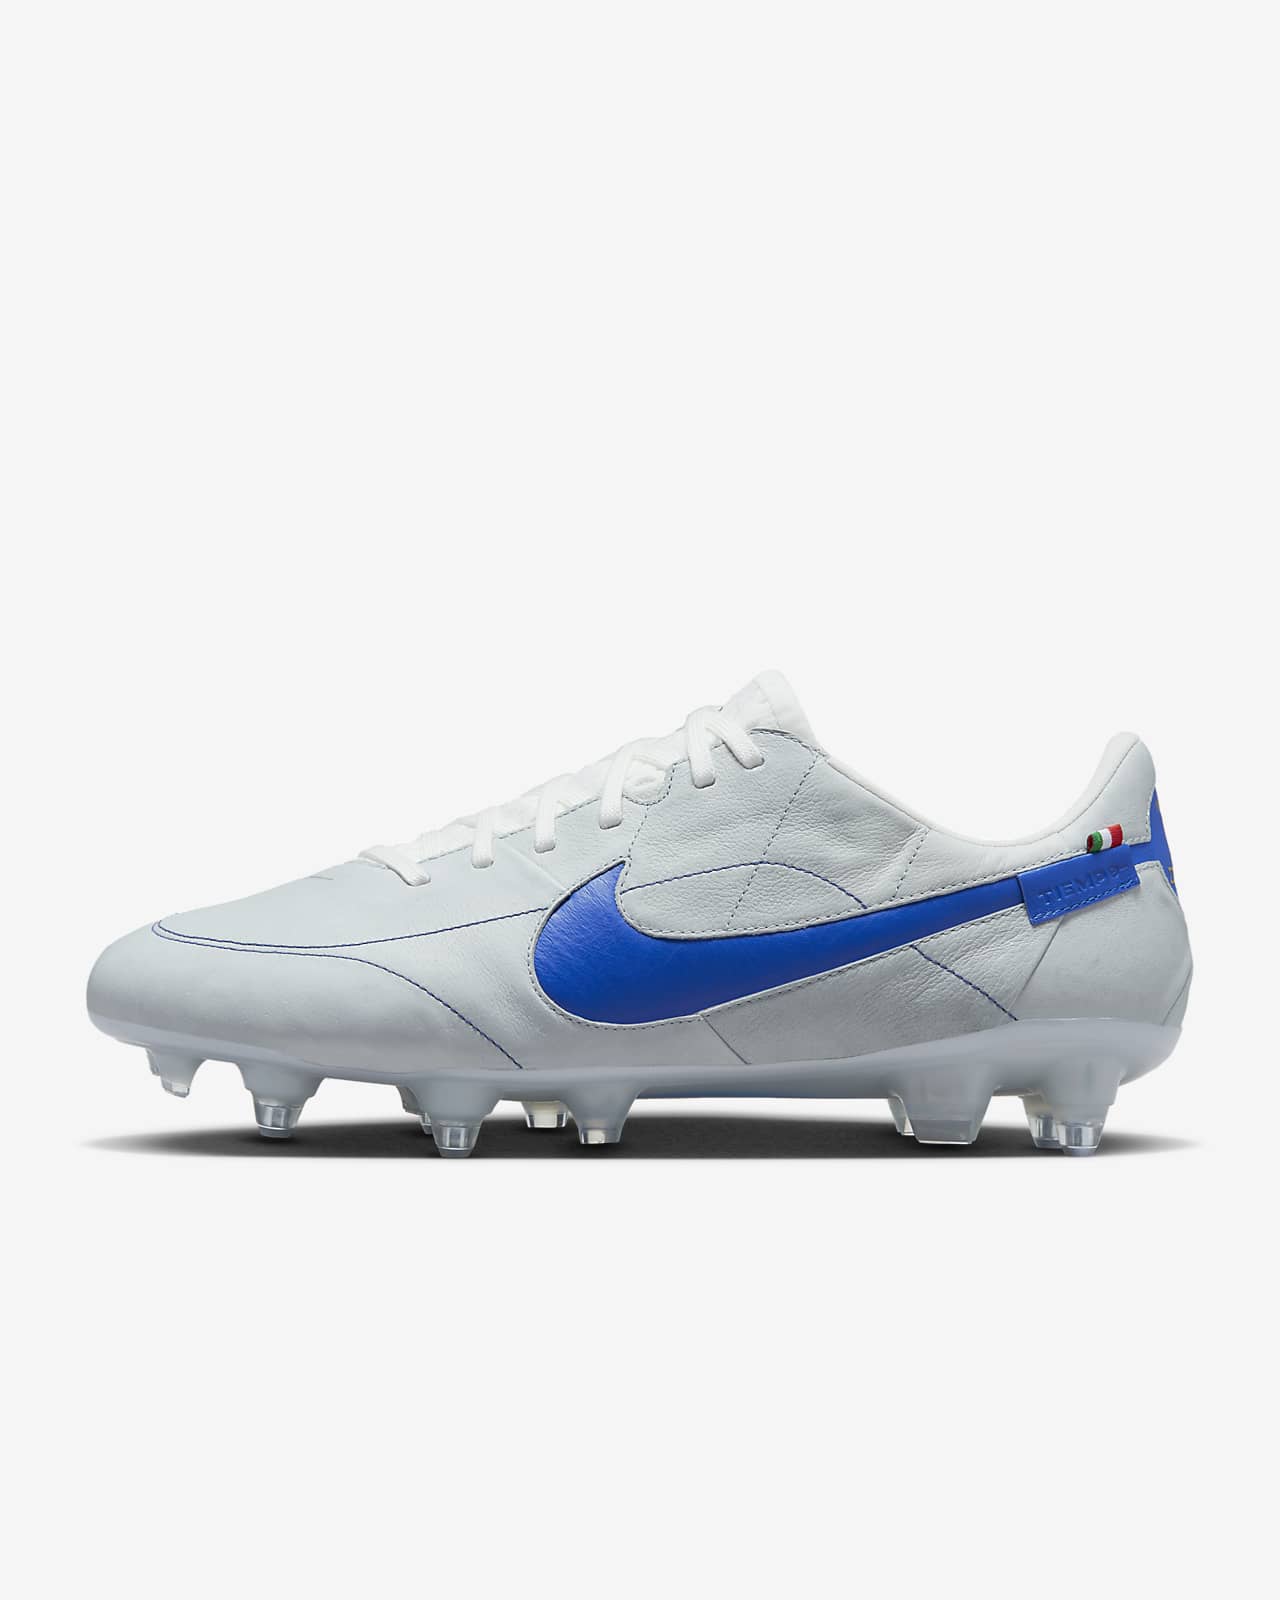 Torment Collapse sheep Nike Tiempo Legend 9 Elite MI SG-Pro Anti-Clog Traction Soft-Ground  Football Boot. Nike HR